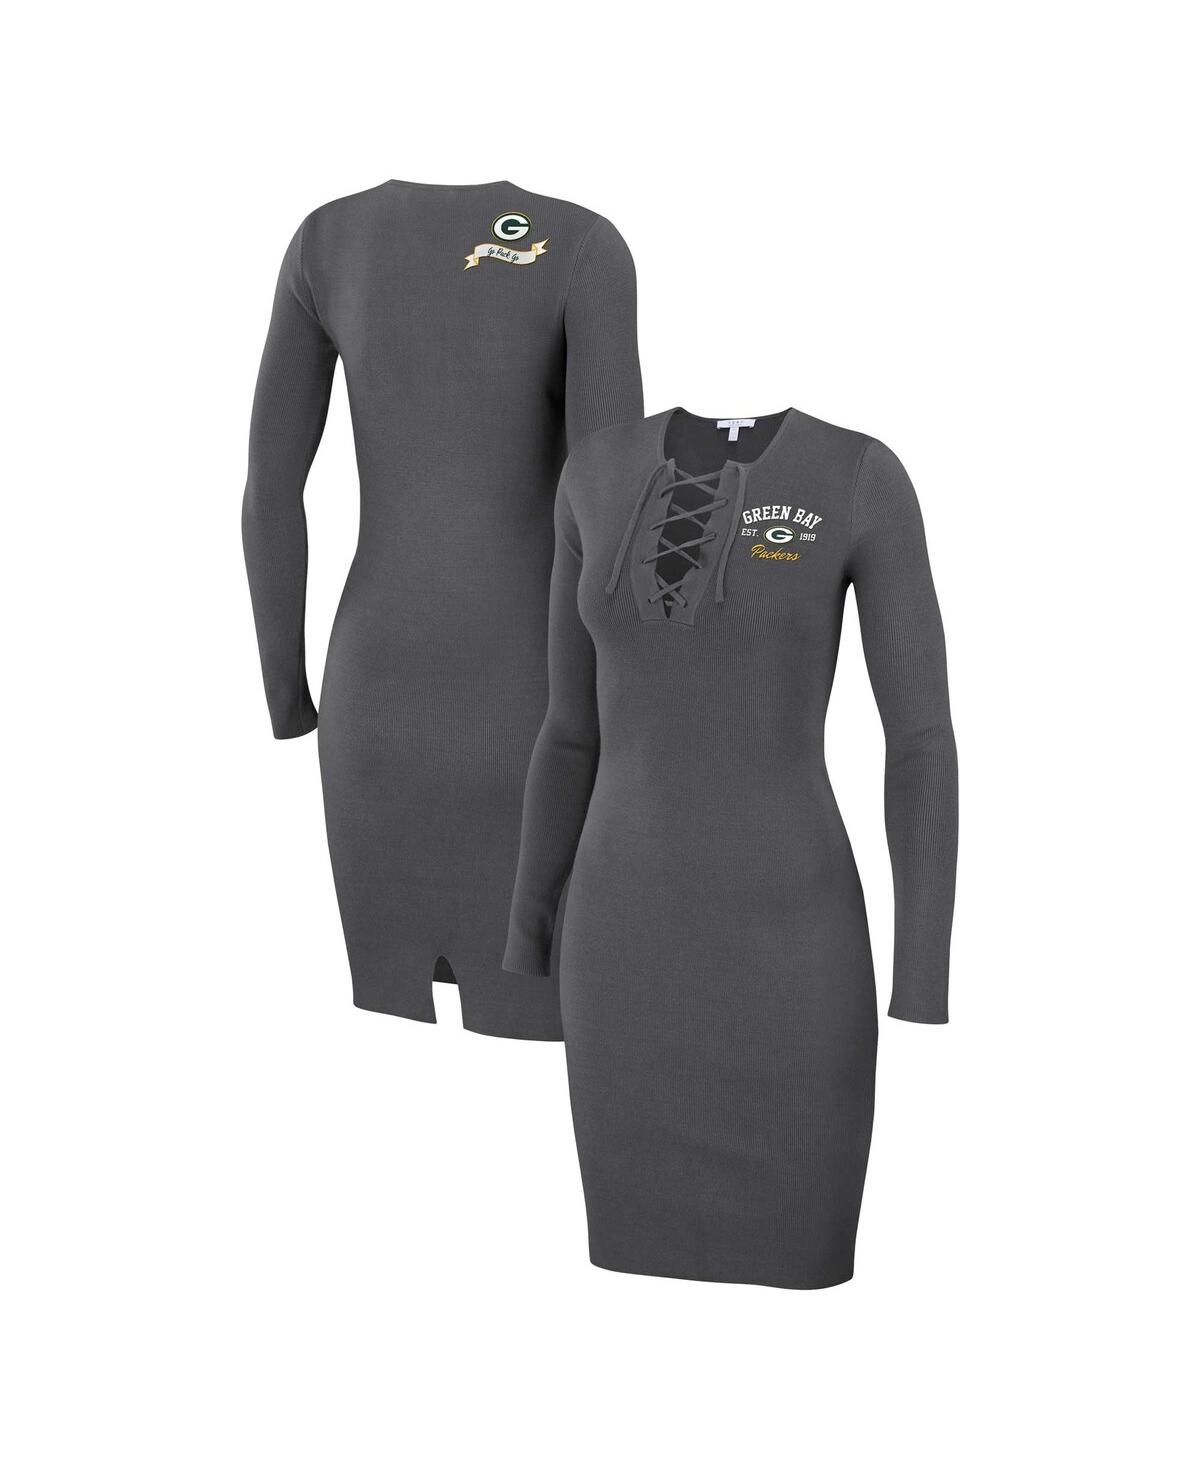 Shop Wear By Erin Andrews Women's  Charcoal Green Bay Packers Lace Up Long Sleeve Dress